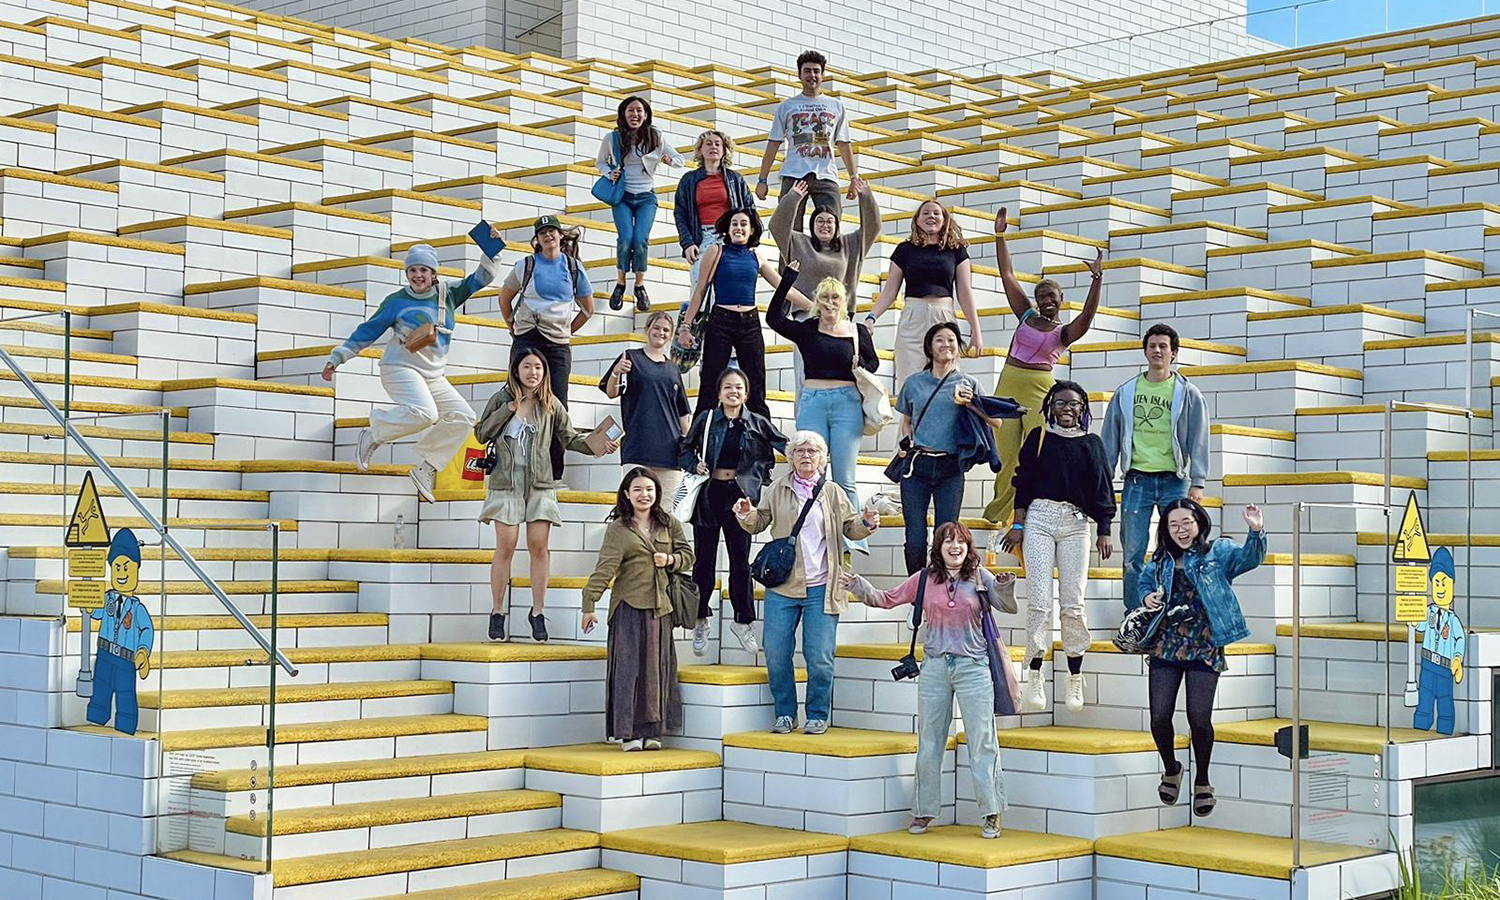 In Billund, Denmark, July Winters ’25 (second row, far right) and students in the DIS Copenhagen program visit Lego House.